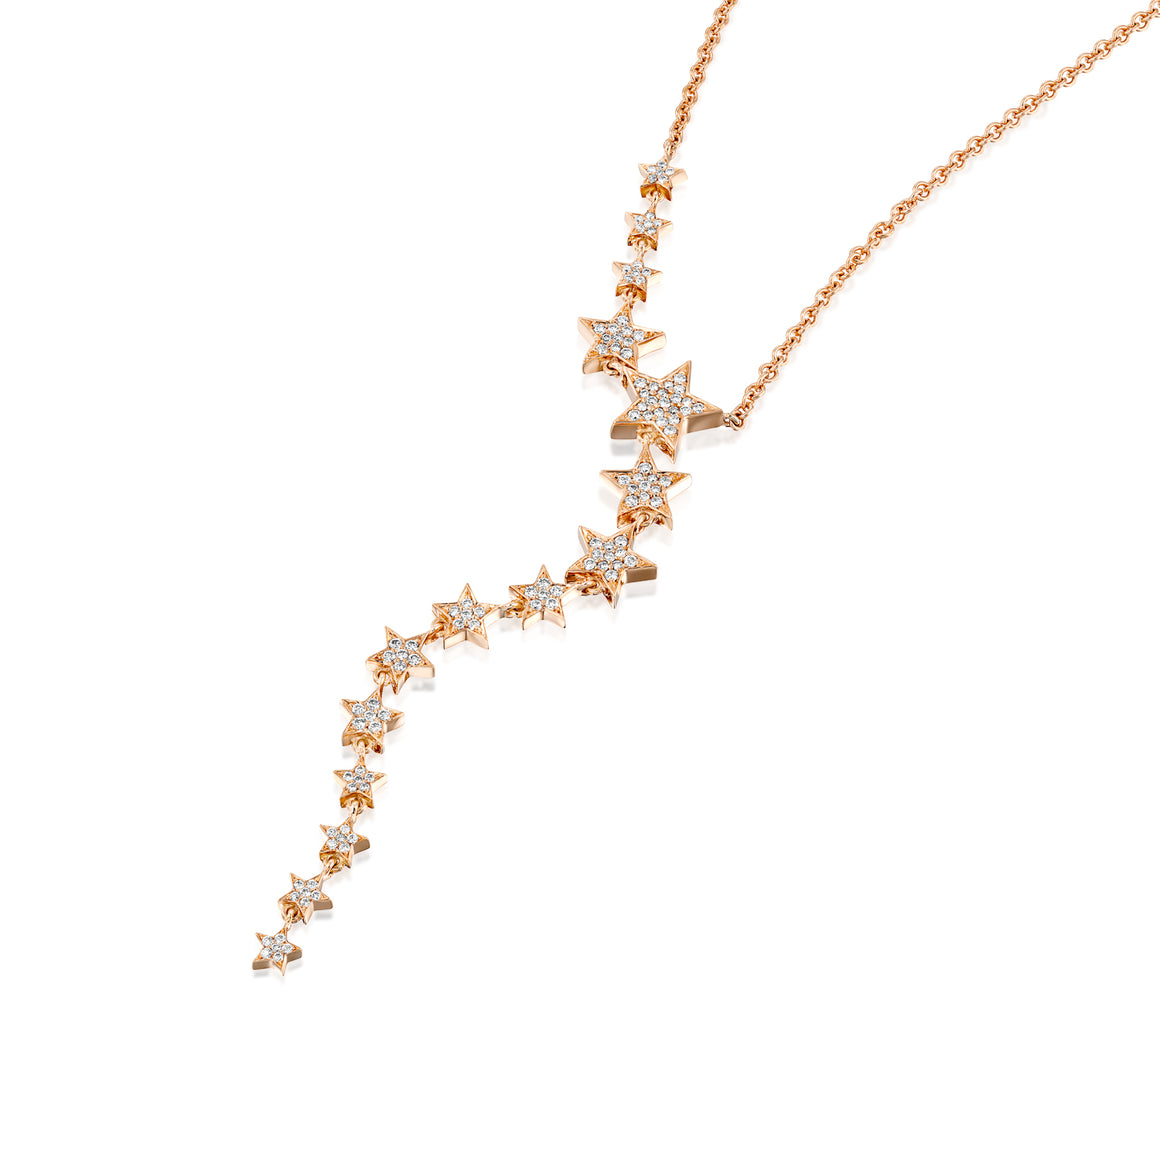 CSTAR-DN-Stars trails  necklace .white/yellow or rose 18k gold